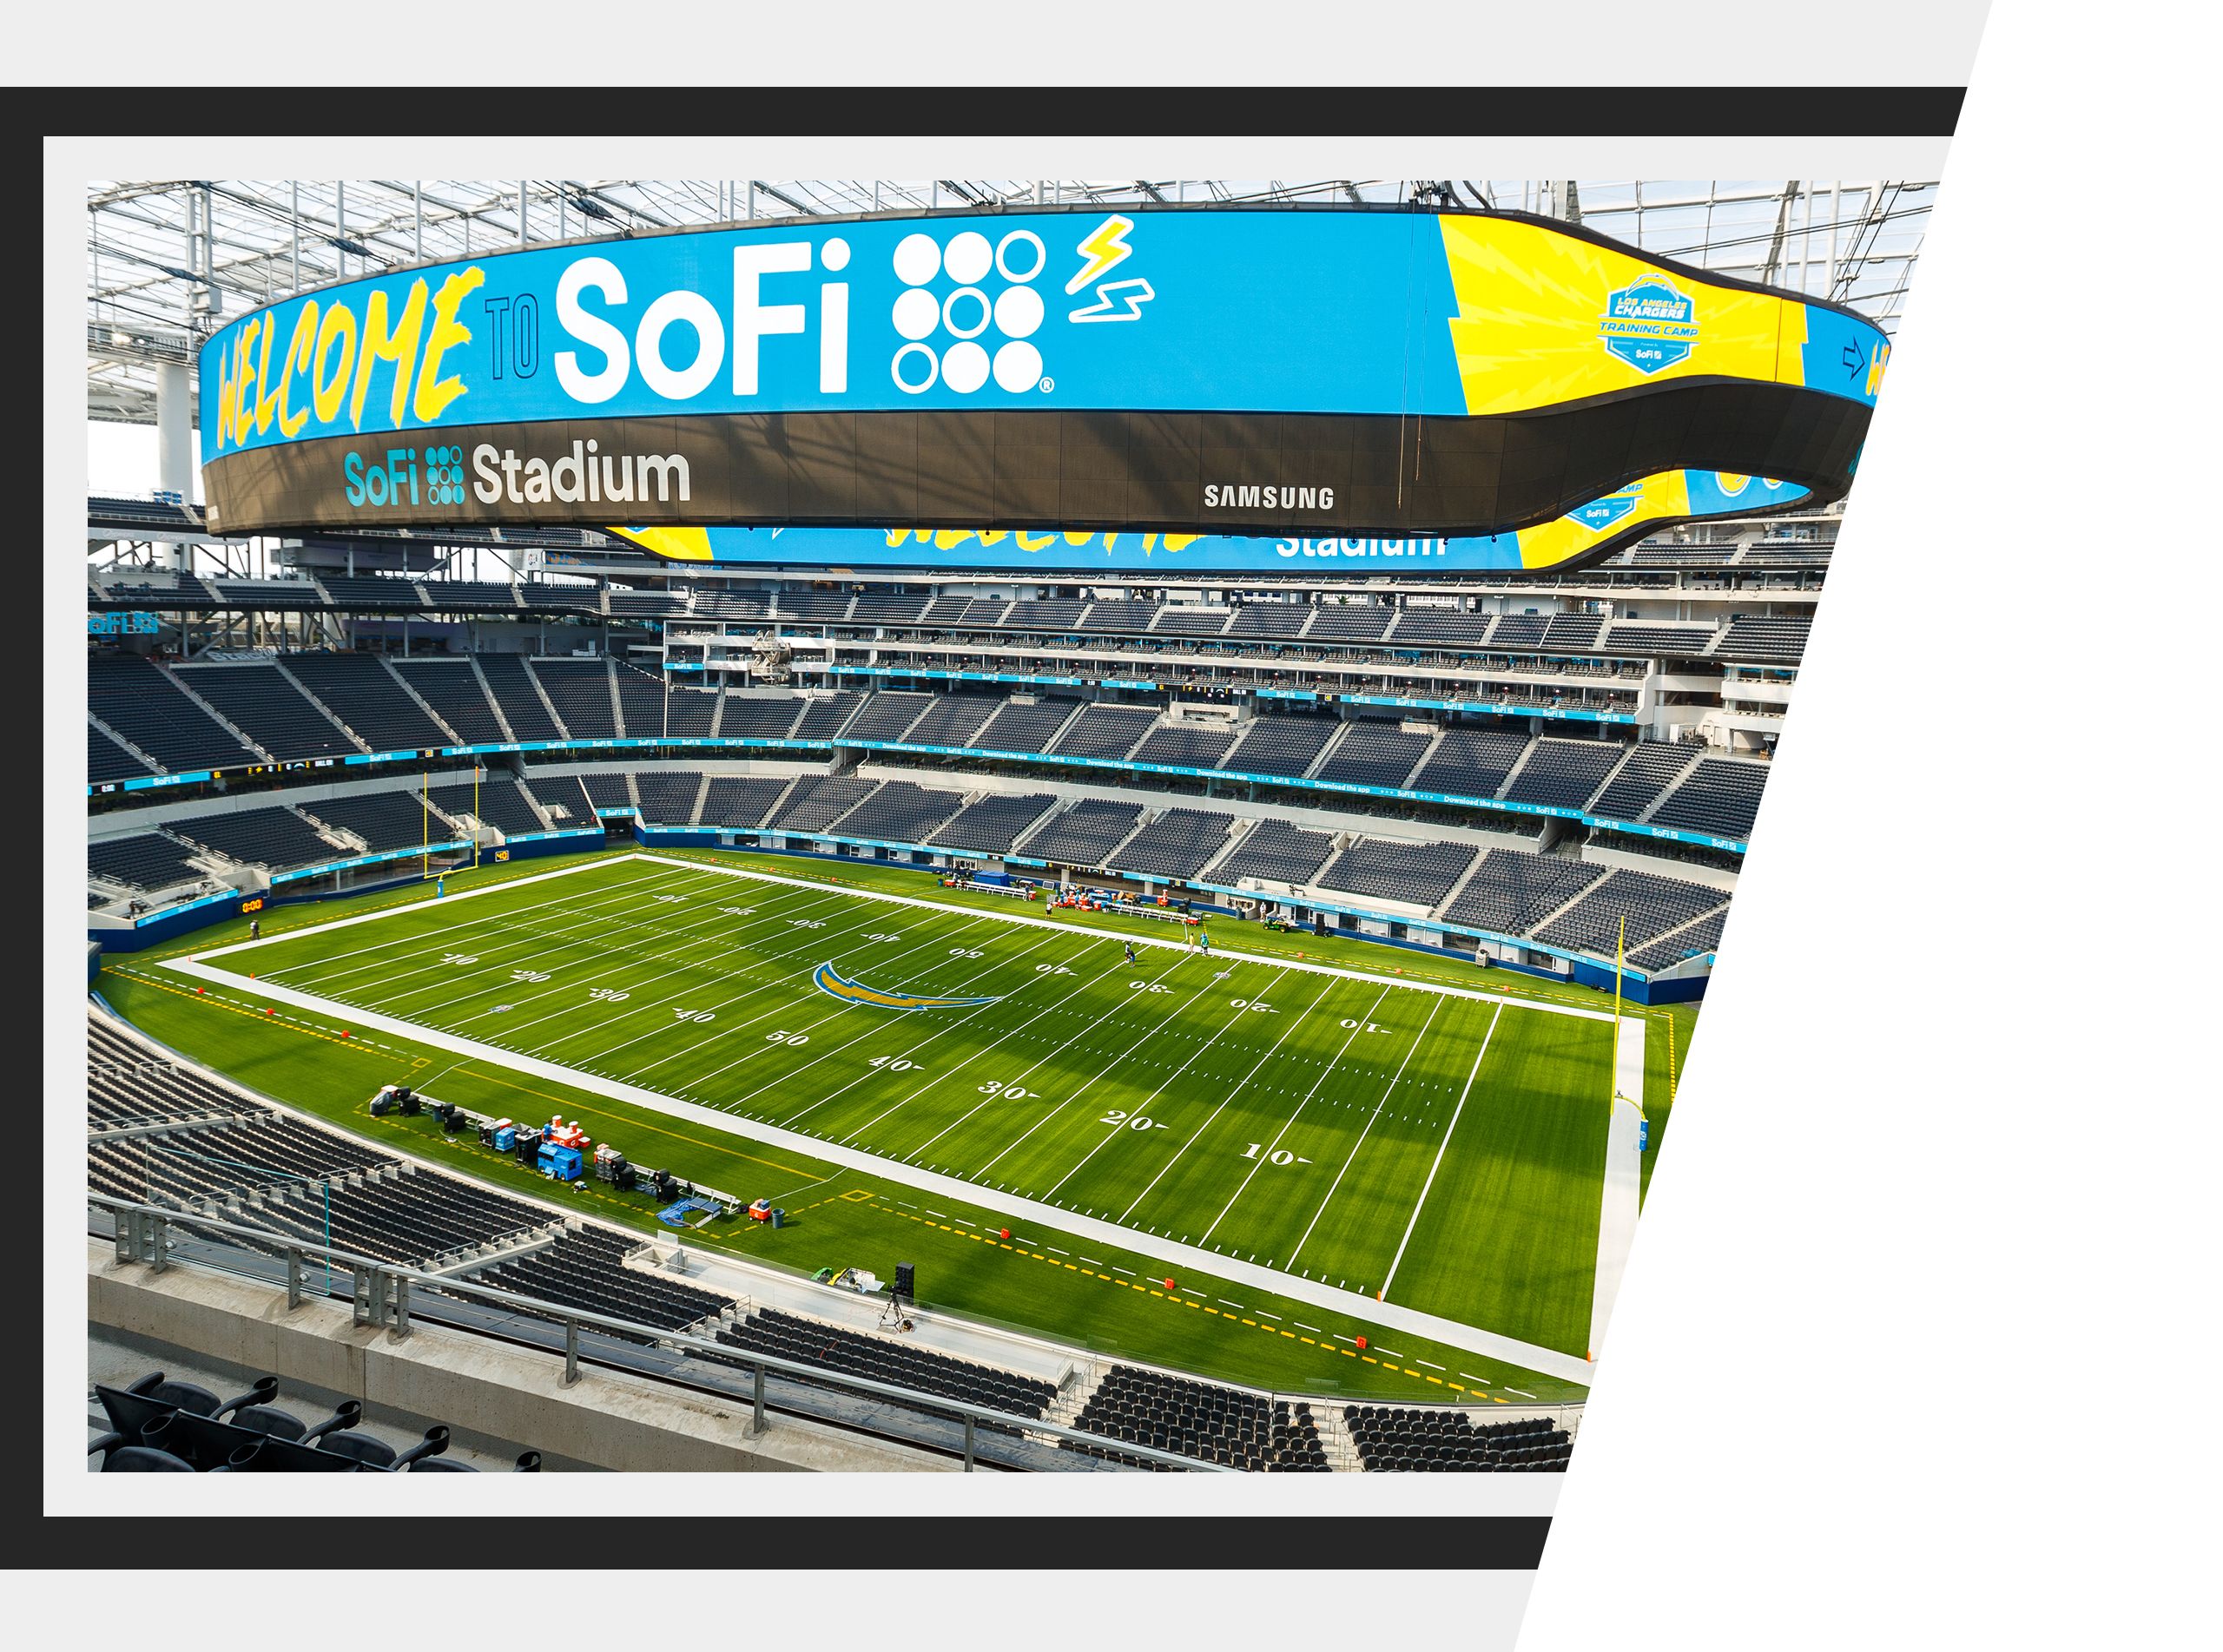 What does SoFi Stadium stand for?